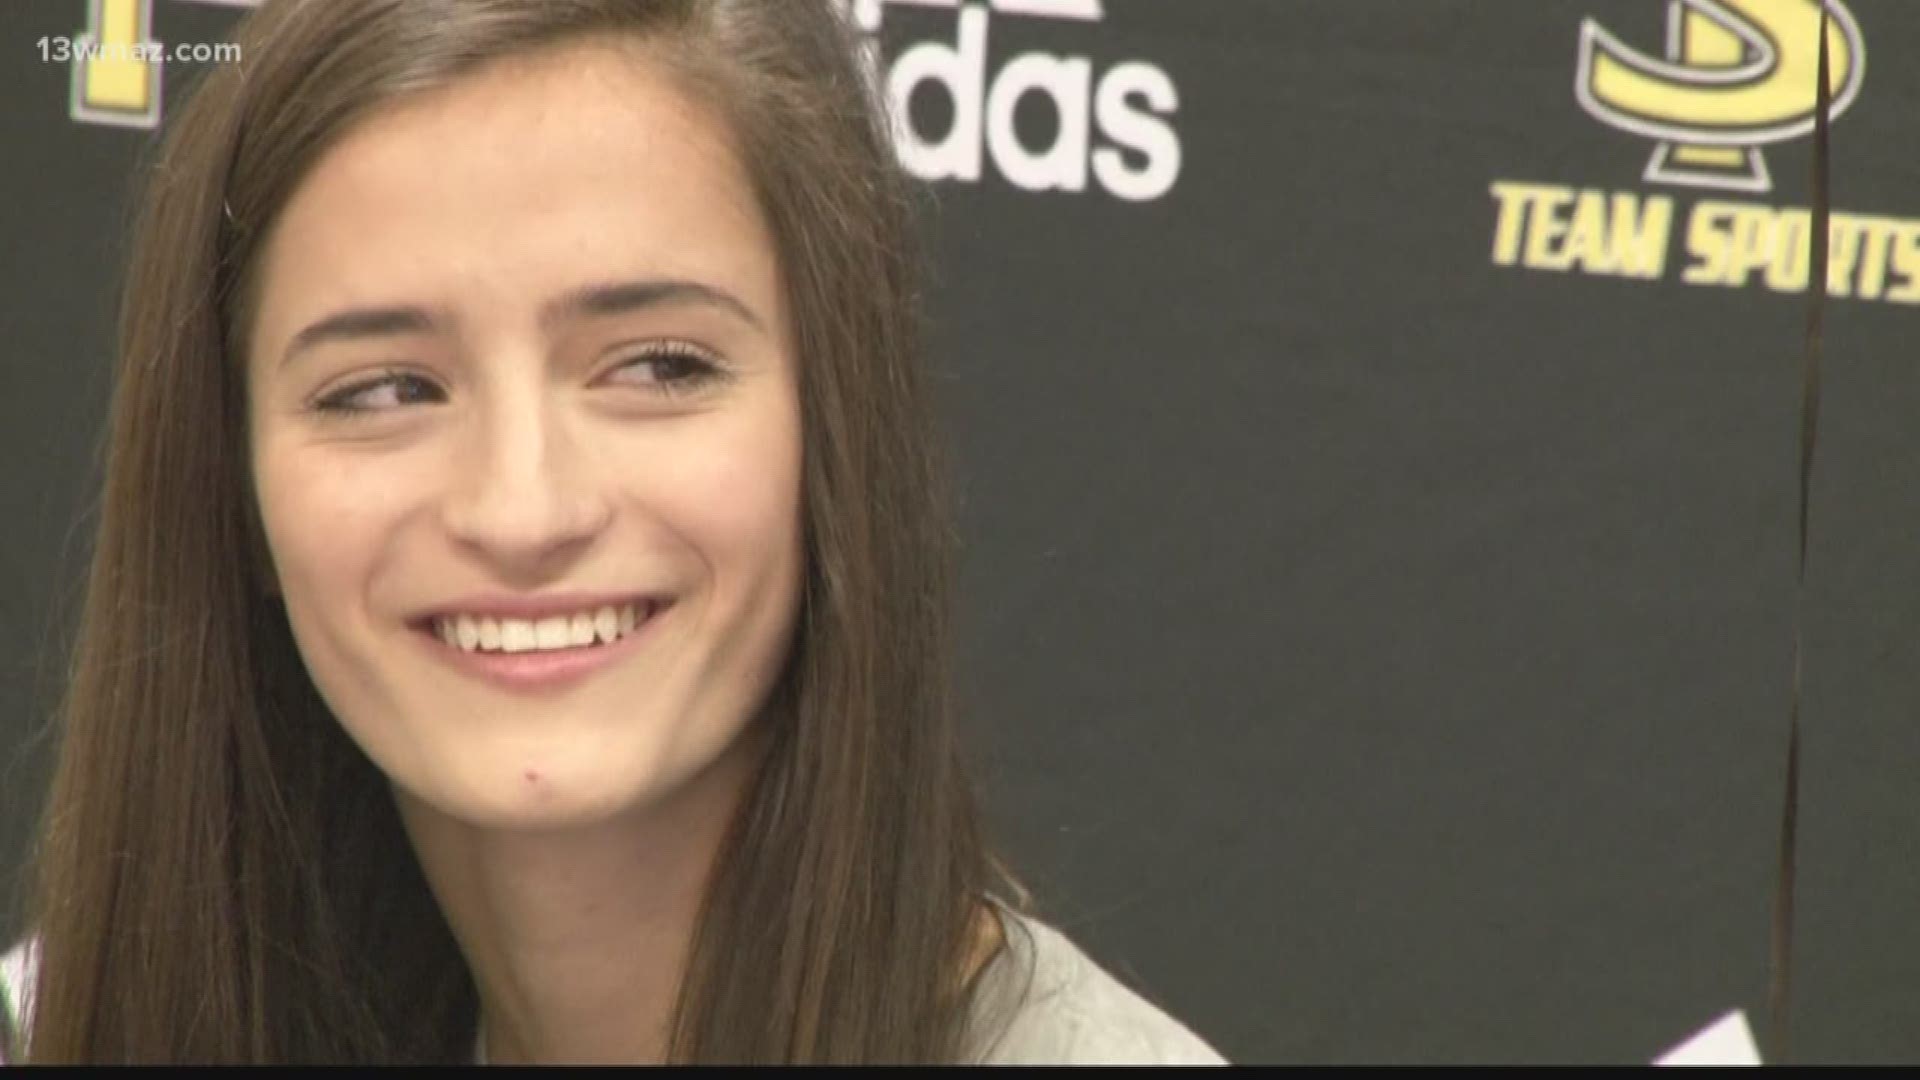 Macy Morris has been cheerleading for 12 years, and has wanted to cheer at the University of Georgia since she was born. She signed to their squad Friday morning.